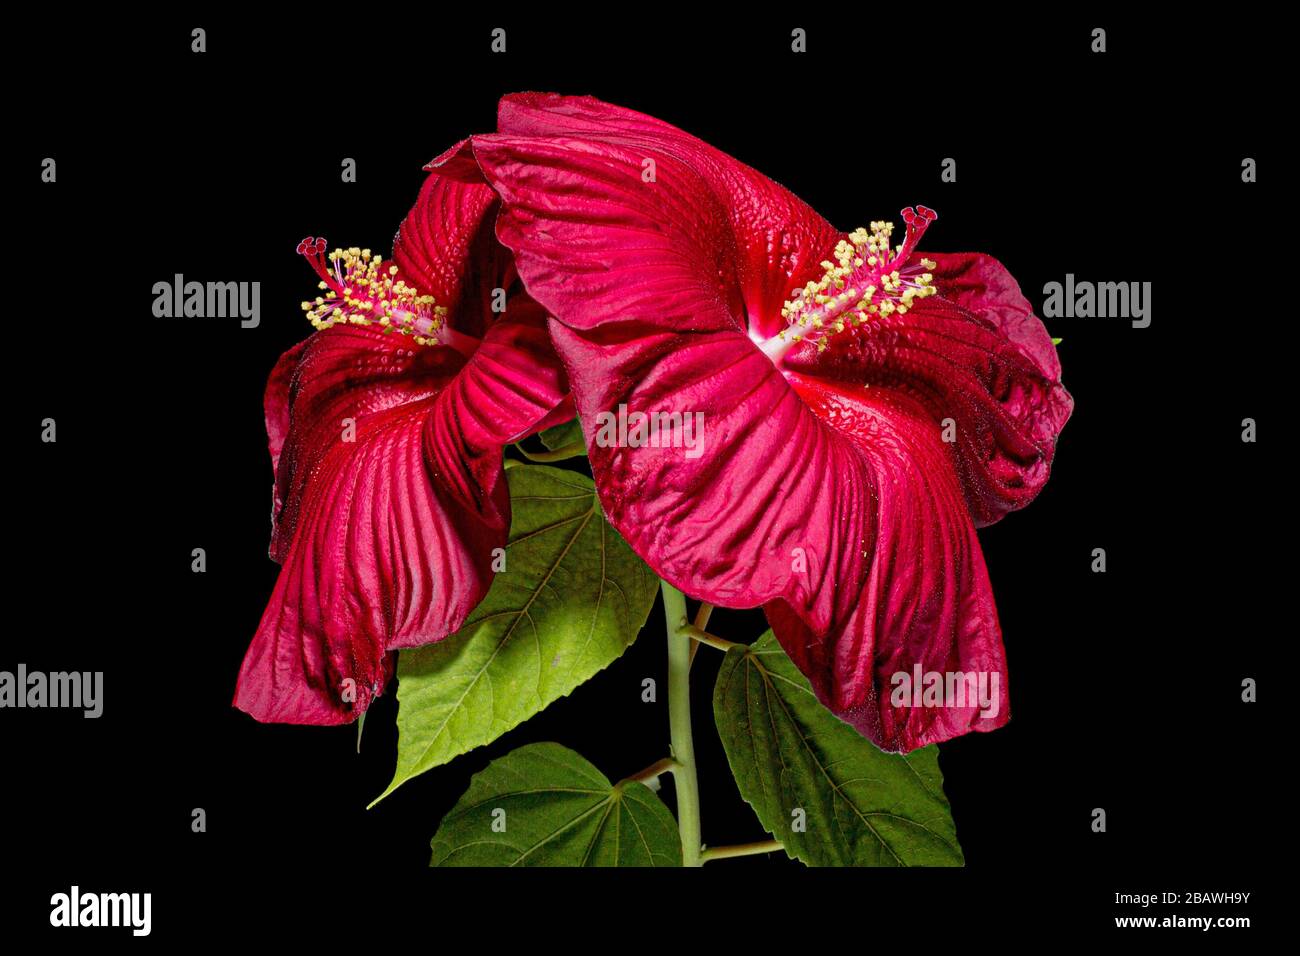 Two blooming flowers of hibiscus, isolated on black background Stock Photo